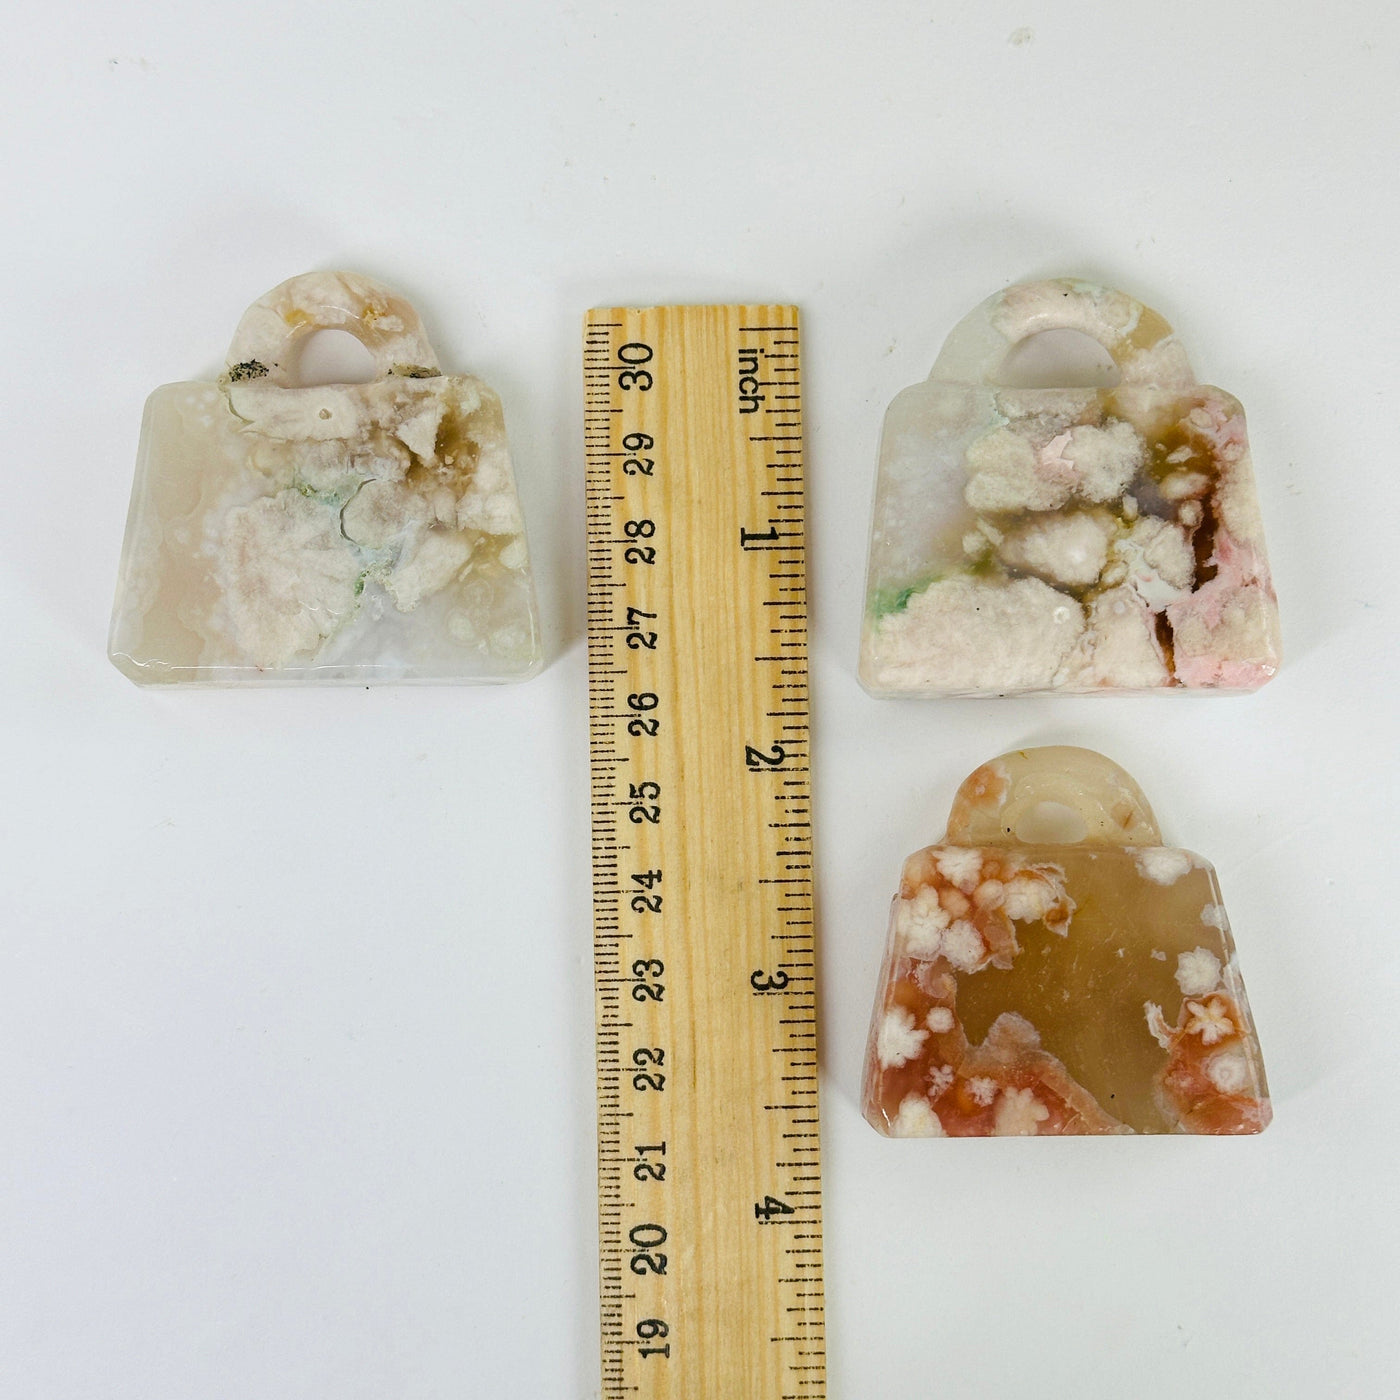 flower agate purse next to a ruler for size reference